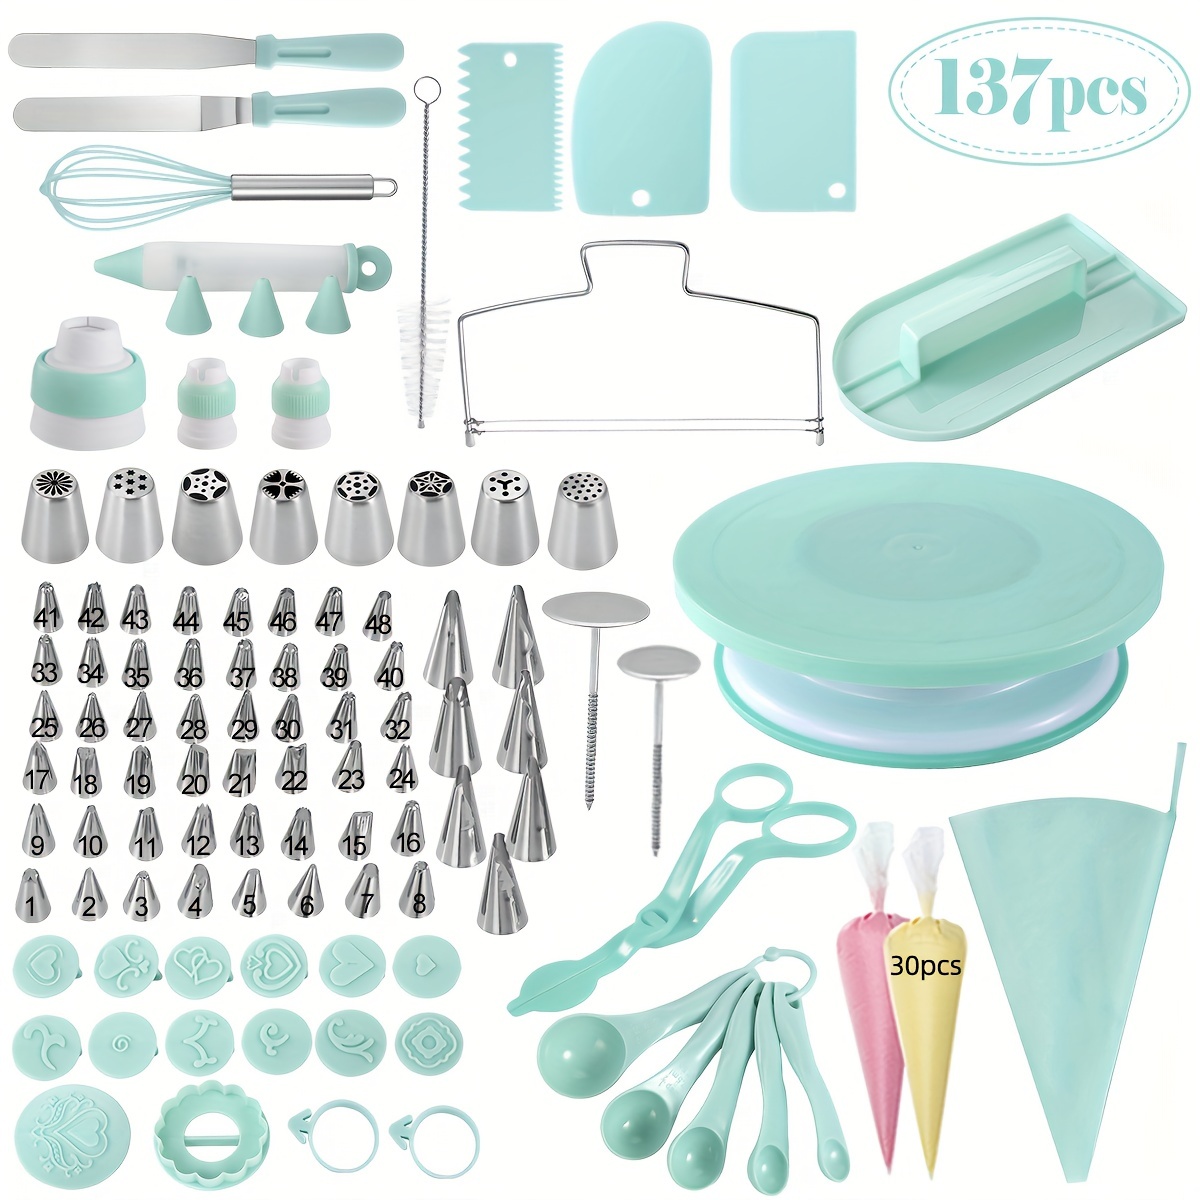 Baking and Pastry Tool Kit